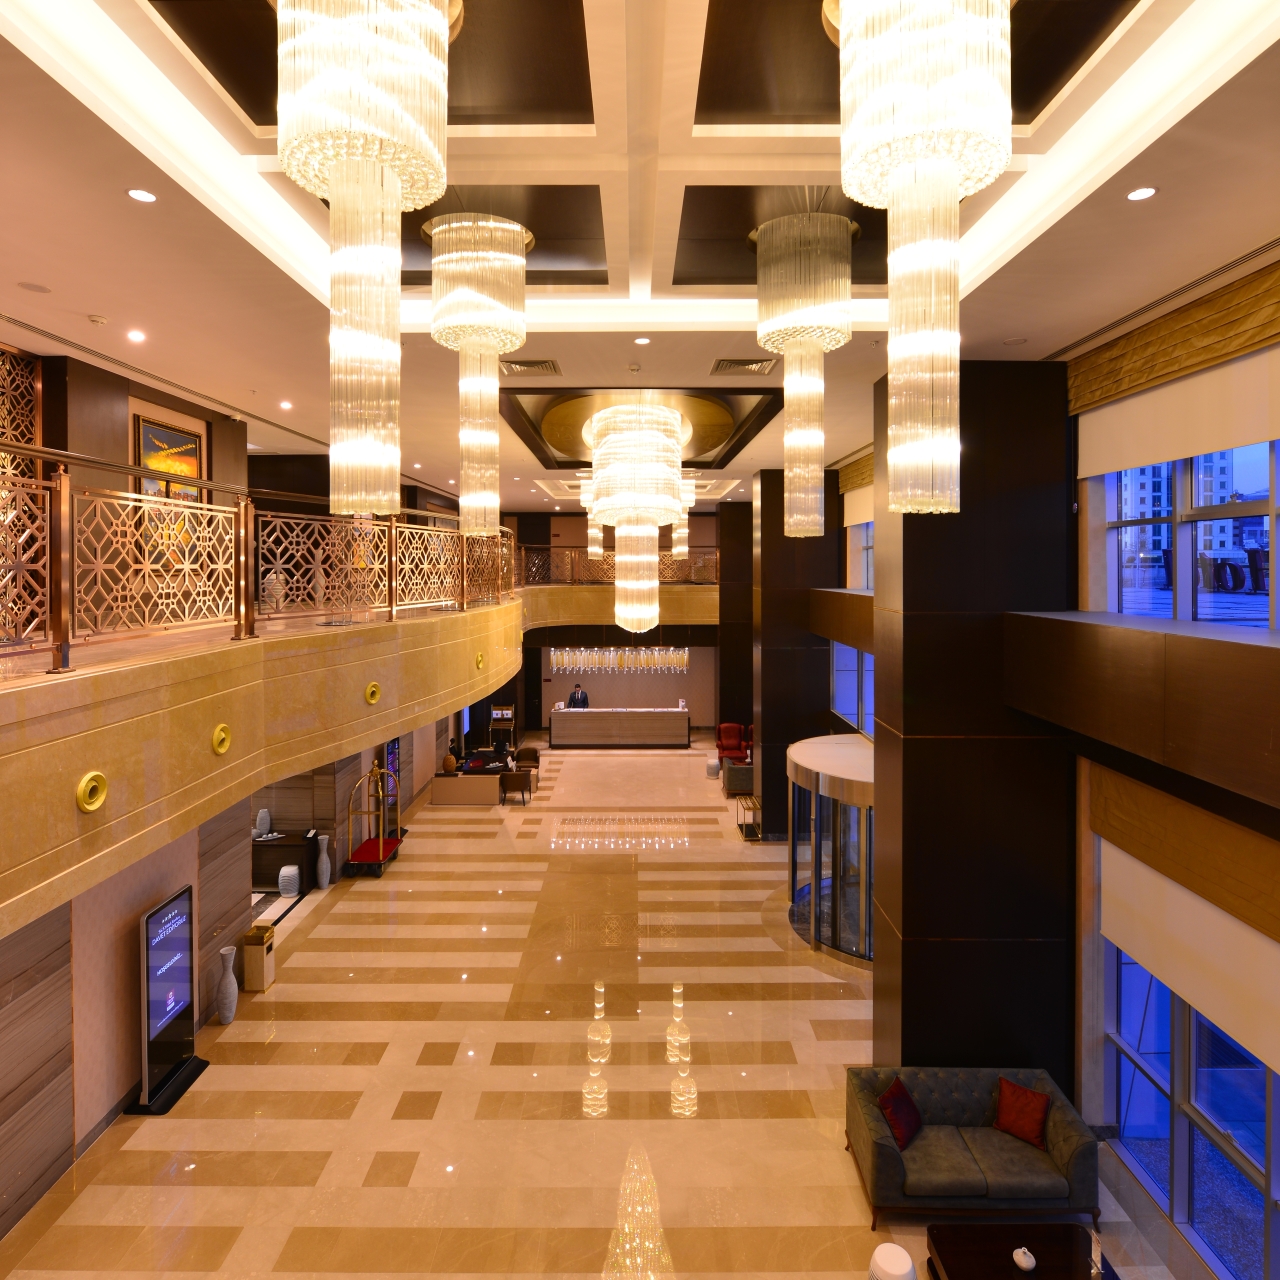 clarion hotel istanbul mahmutbey at hrs with free services